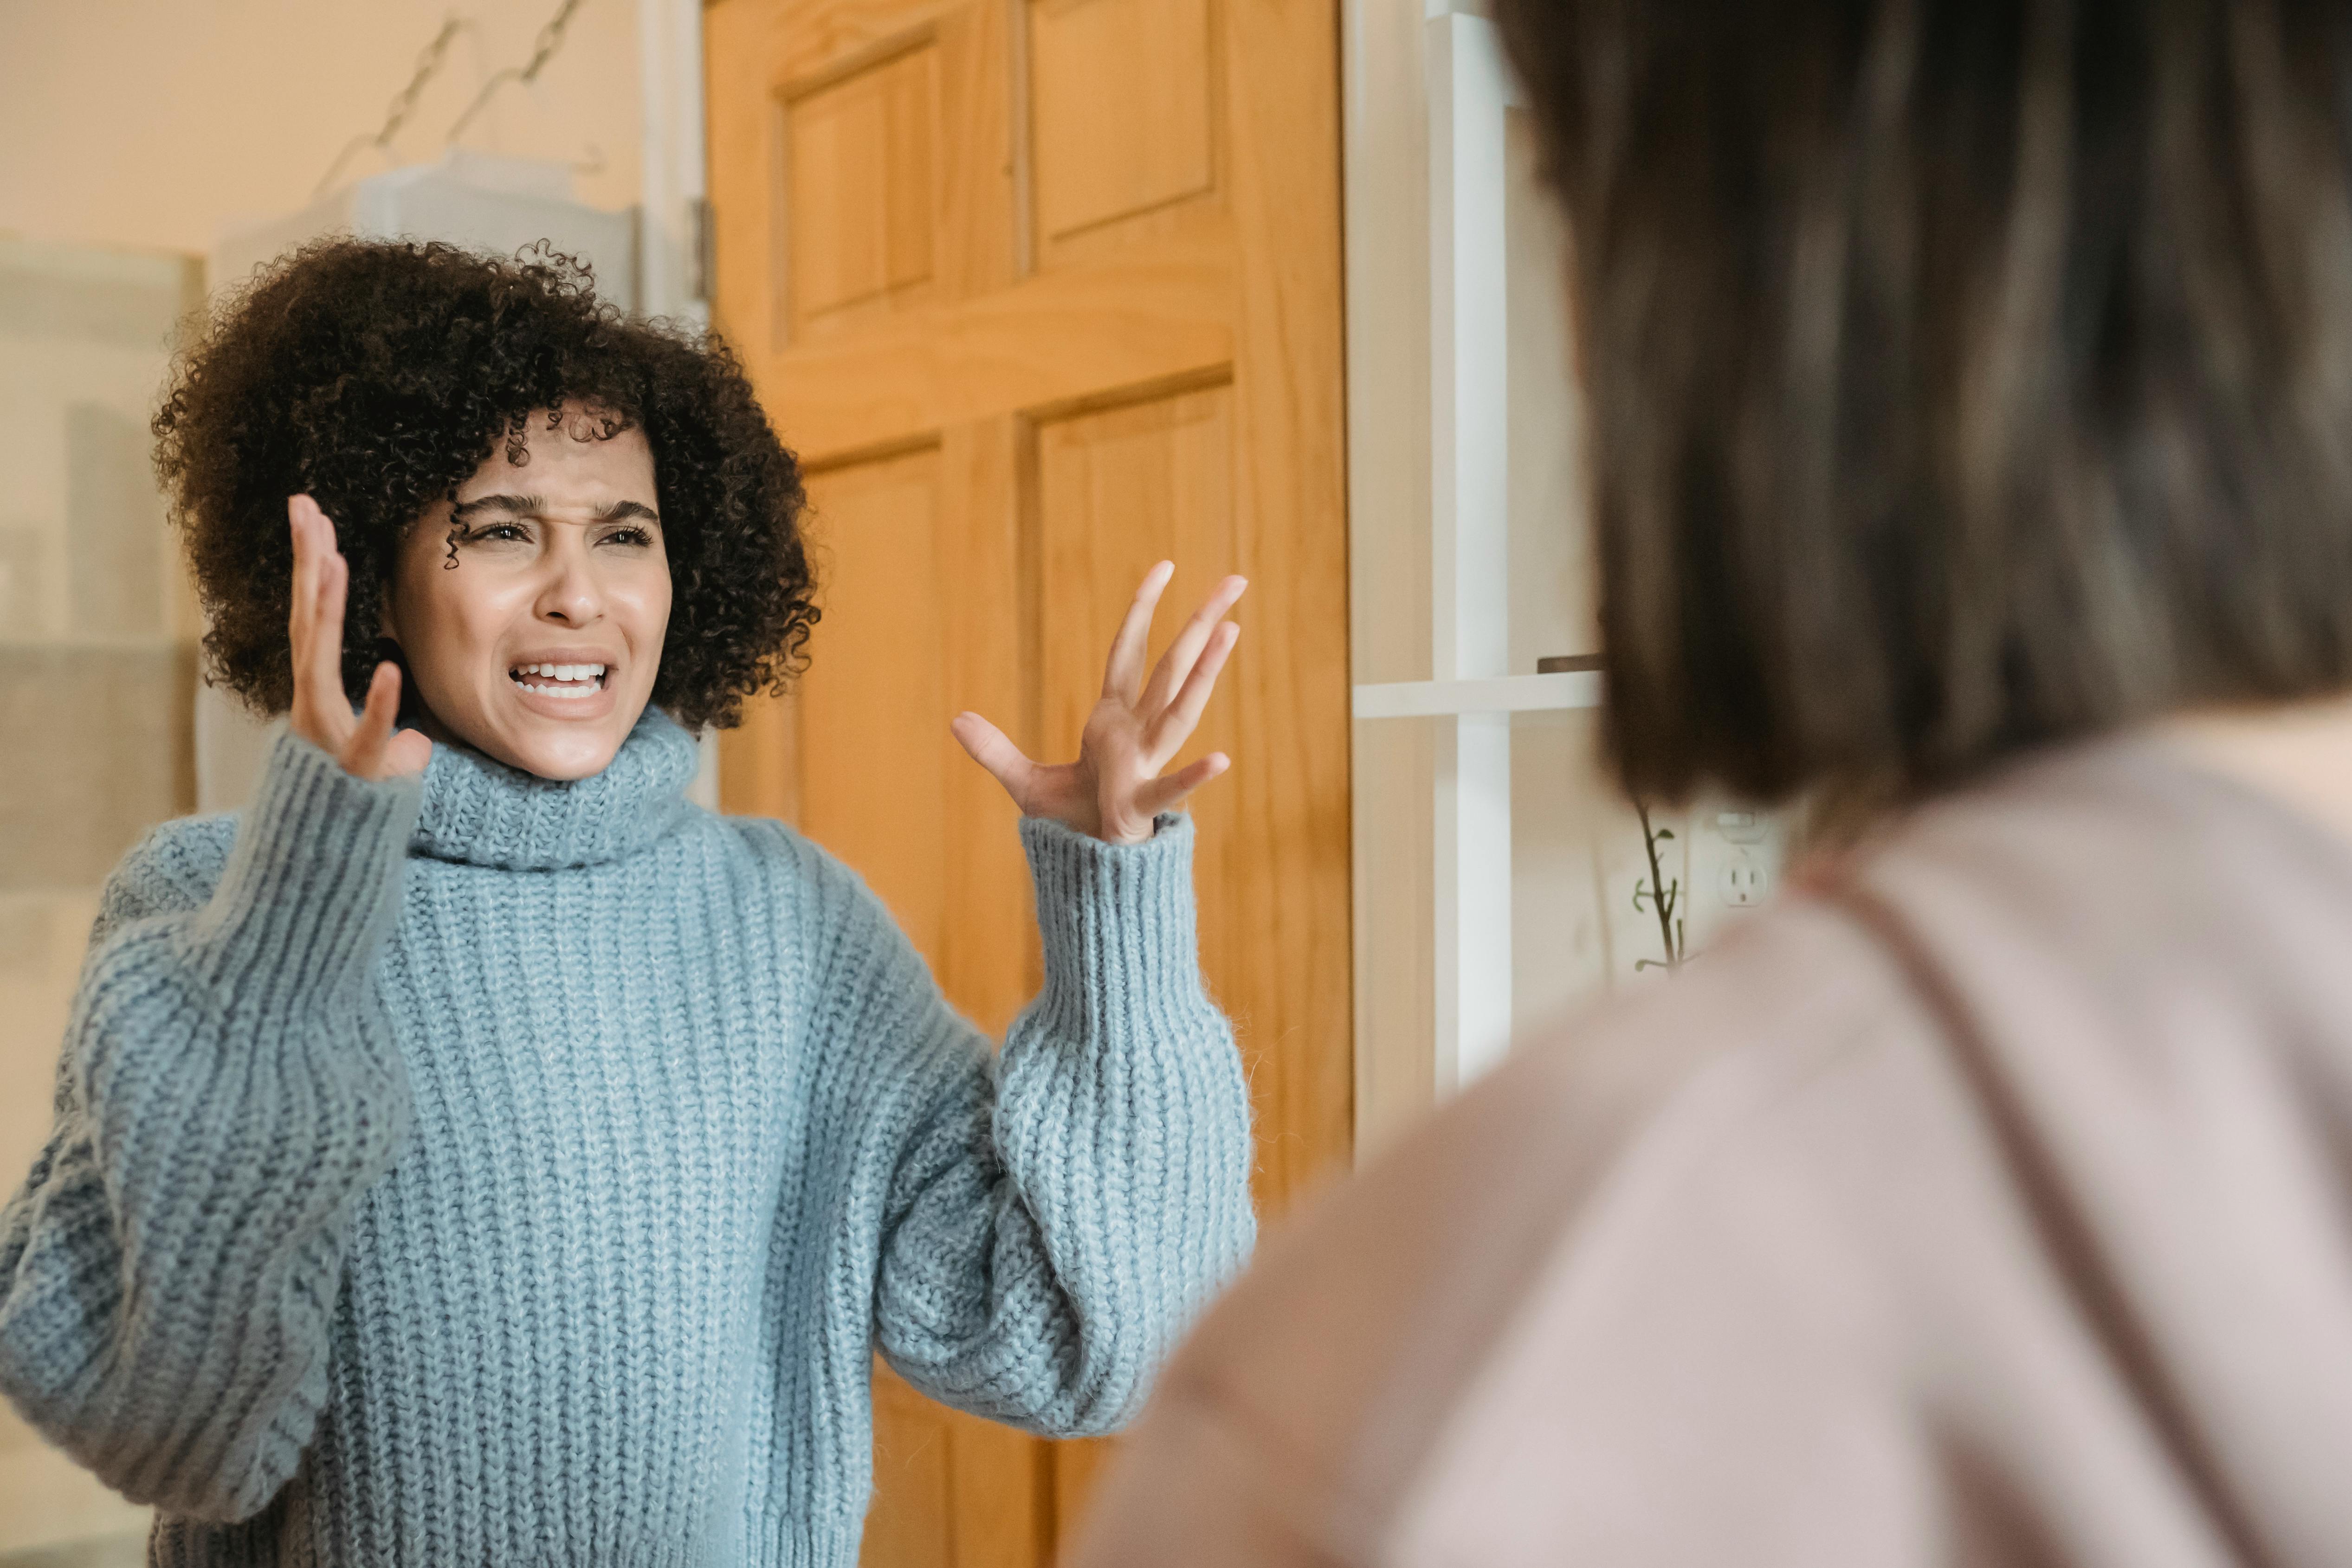 Two women having conflict at home | Source: Pexels